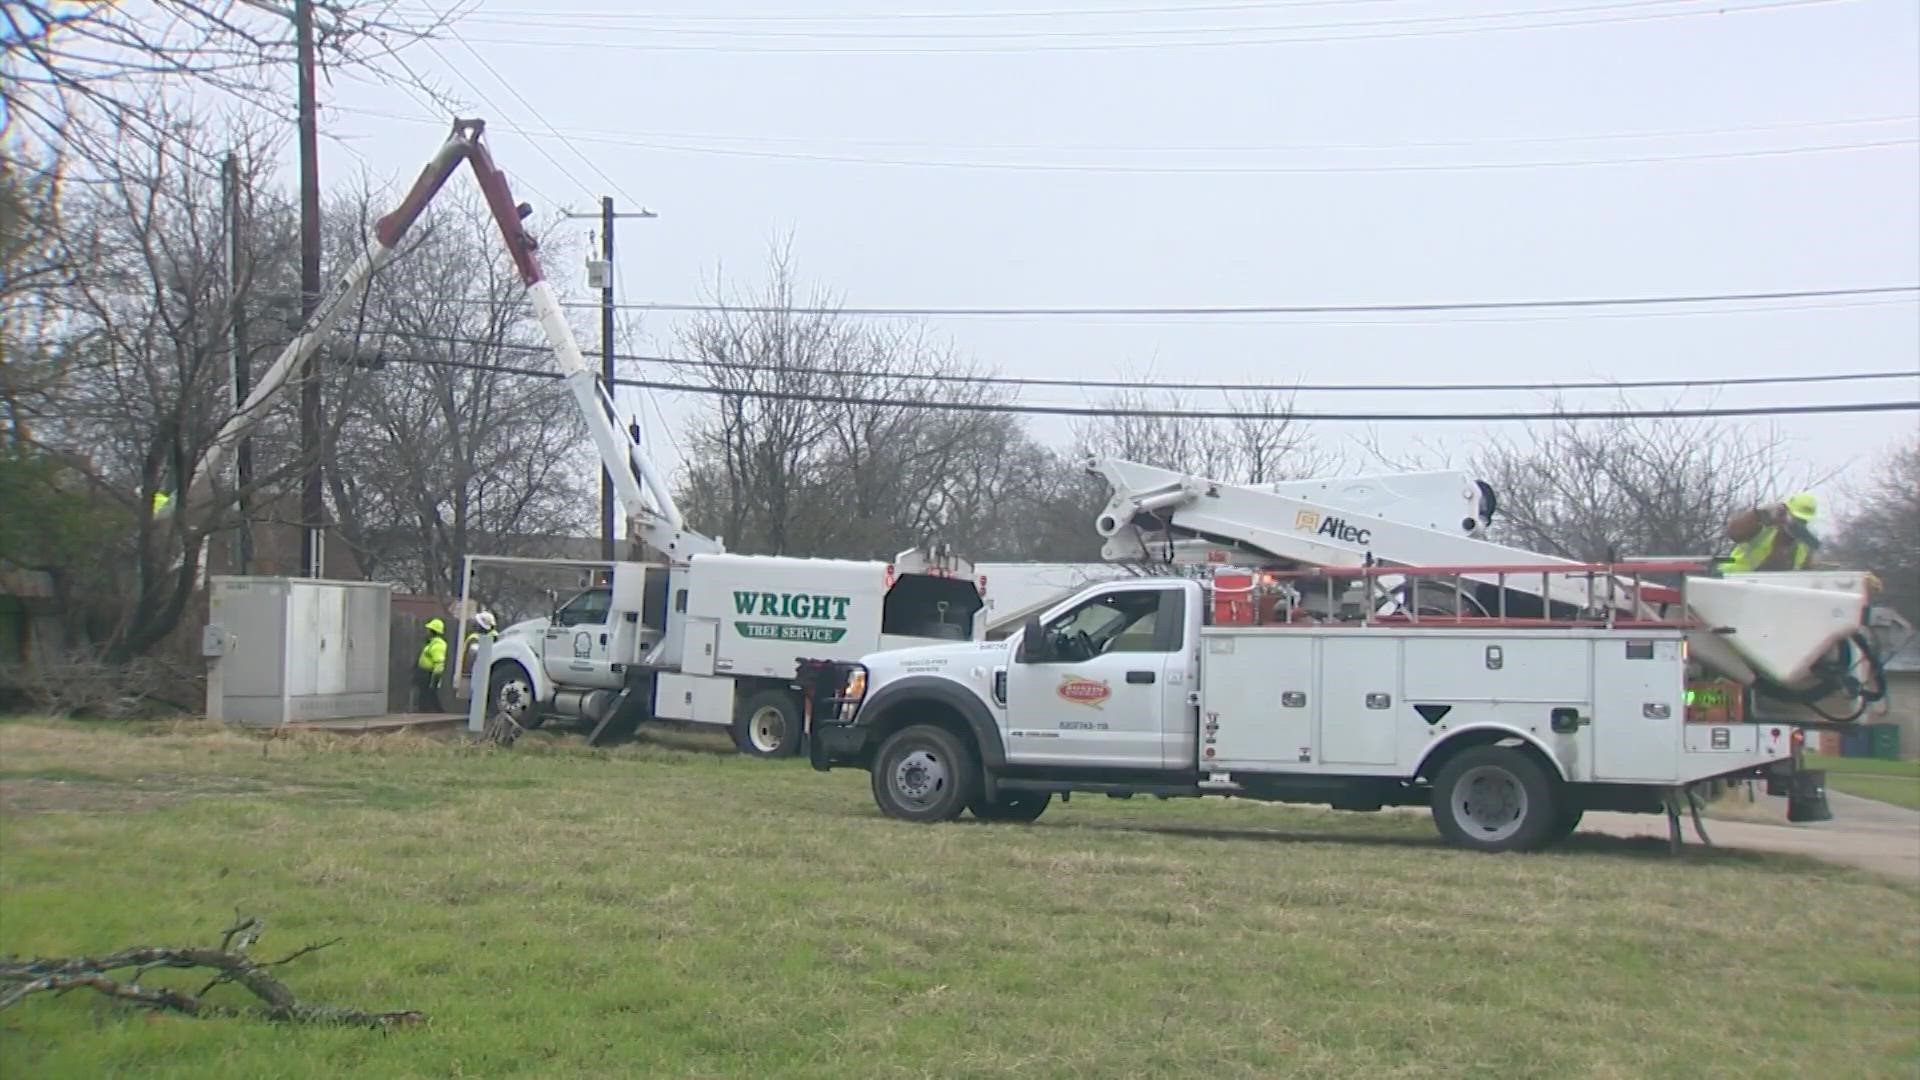 The winter storm left hundreds of thousands in North and Central Texas without power for days. When power will be fully restored is still a question.